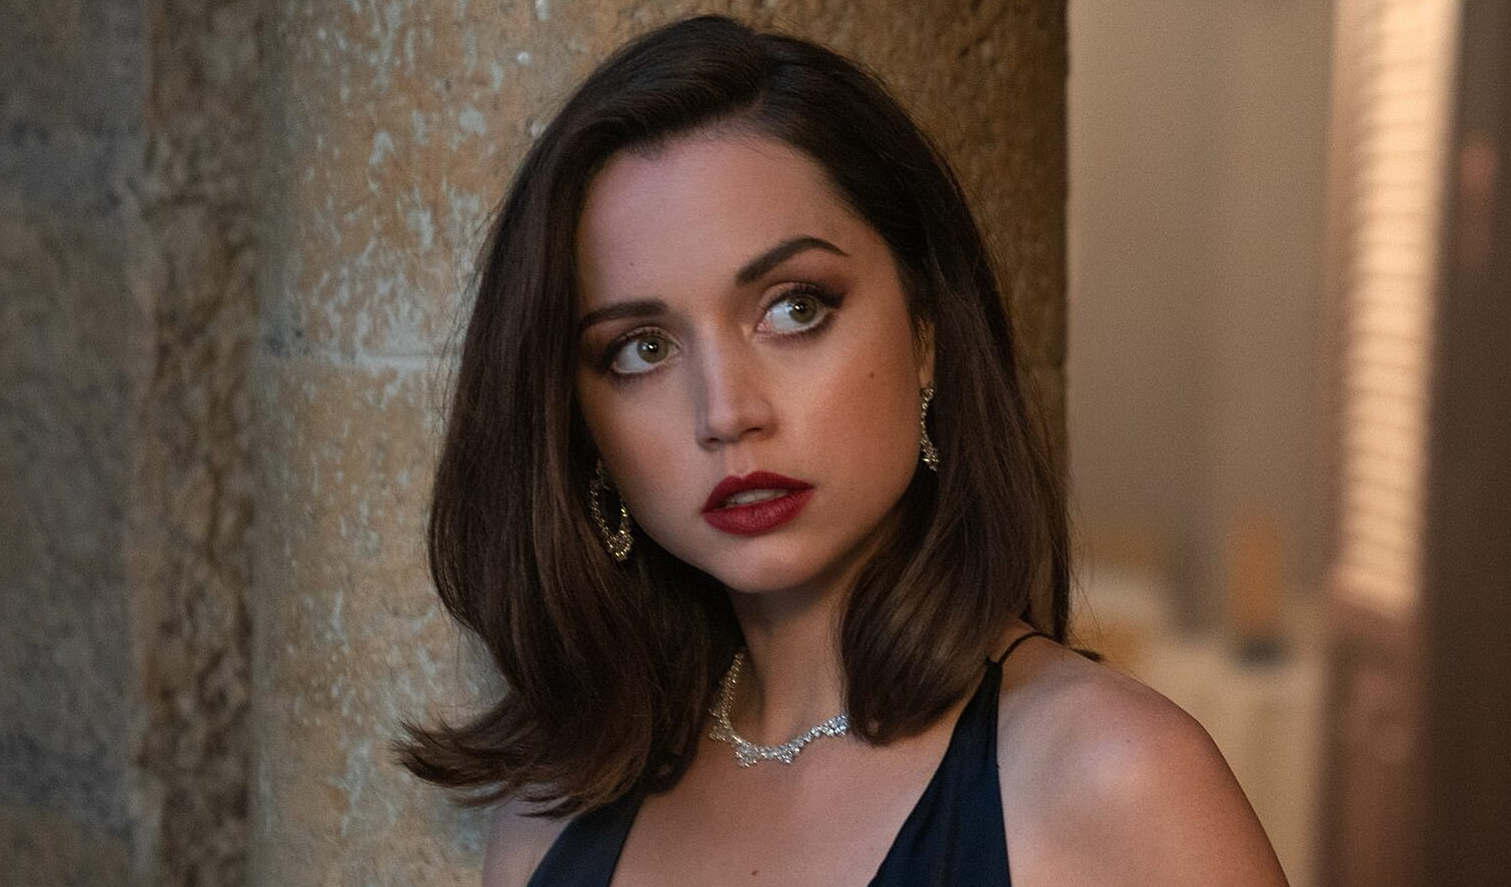 Ana de Armas says she was ghosted by men with how she used to look